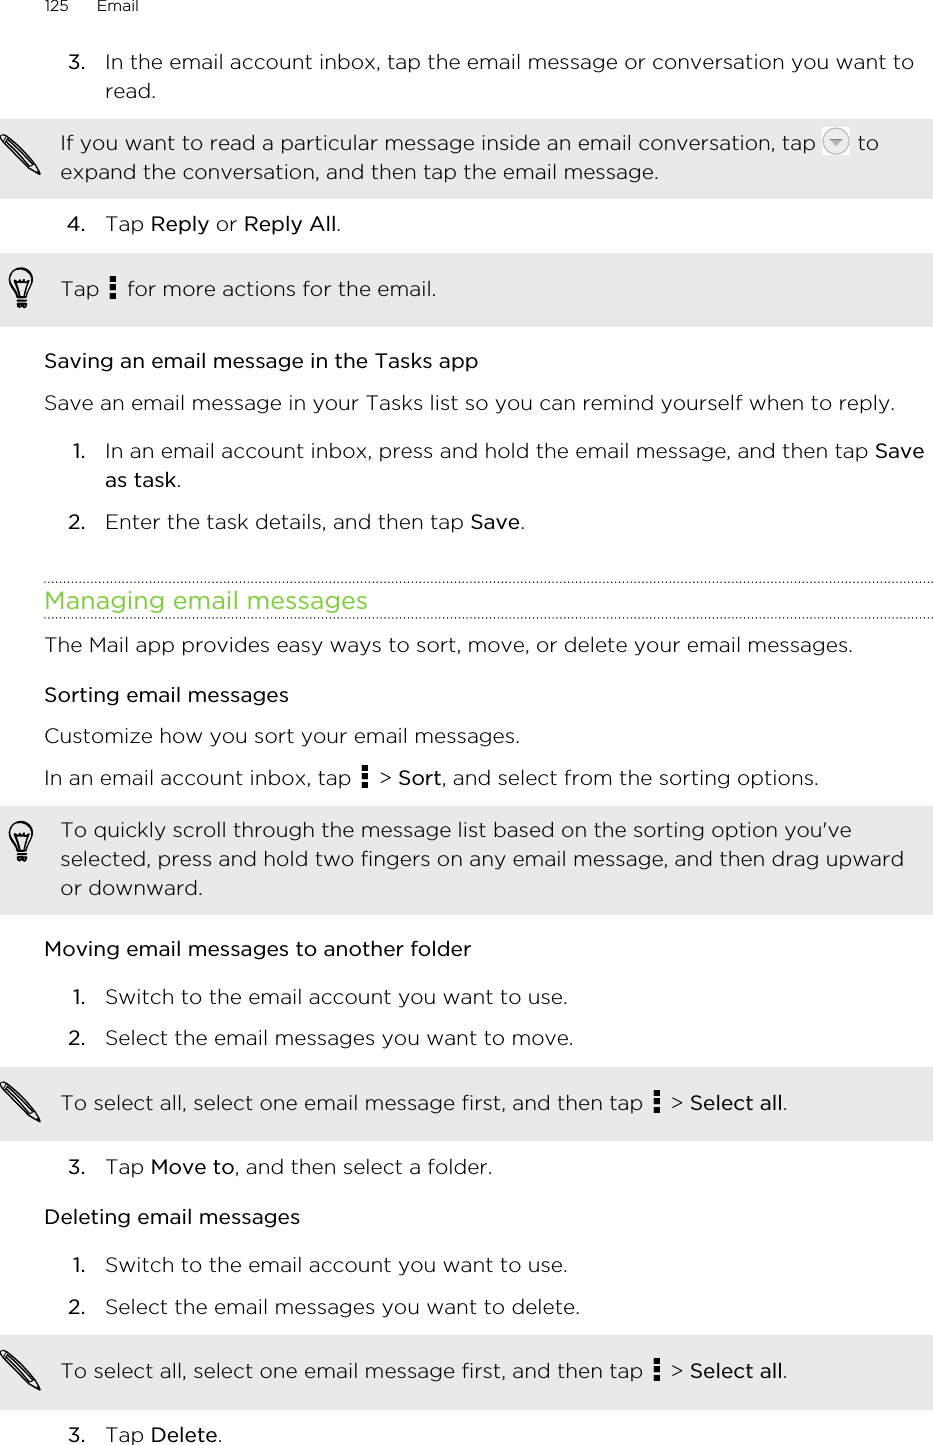 3. In the email account inbox, tap the email message or conversation you want toread. If you want to read a particular message inside an email conversation, tap   toexpand the conversation, and then tap the email message.4. Tap Reply or Reply All. Tap   for more actions for the email.Saving an email message in the Tasks appSave an email message in your Tasks list so you can remind yourself when to reply.1. In an email account inbox, press and hold the email message, and then tap Saveas task.2. Enter the task details, and then tap Save.Managing email messagesThe Mail app provides easy ways to sort, move, or delete your email messages.Sorting email messagesCustomize how you sort your email messages.In an email account inbox, tap   &gt; Sort, and select from the sorting options.To quickly scroll through the message list based on the sorting option you&apos;veselected, press and hold two fingers on any email message, and then drag upwardor downward.Moving email messages to another folder1. Switch to the email account you want to use.2. Select the email messages you want to move. To select all, select one email message first, and then tap   &gt; Select all.3. Tap Move to, and then select a folder.Deleting email messages1. Switch to the email account you want to use.2. Select the email messages you want to delete. To select all, select one email message first, and then tap   &gt; Select all.3. Tap Delete.125 Email